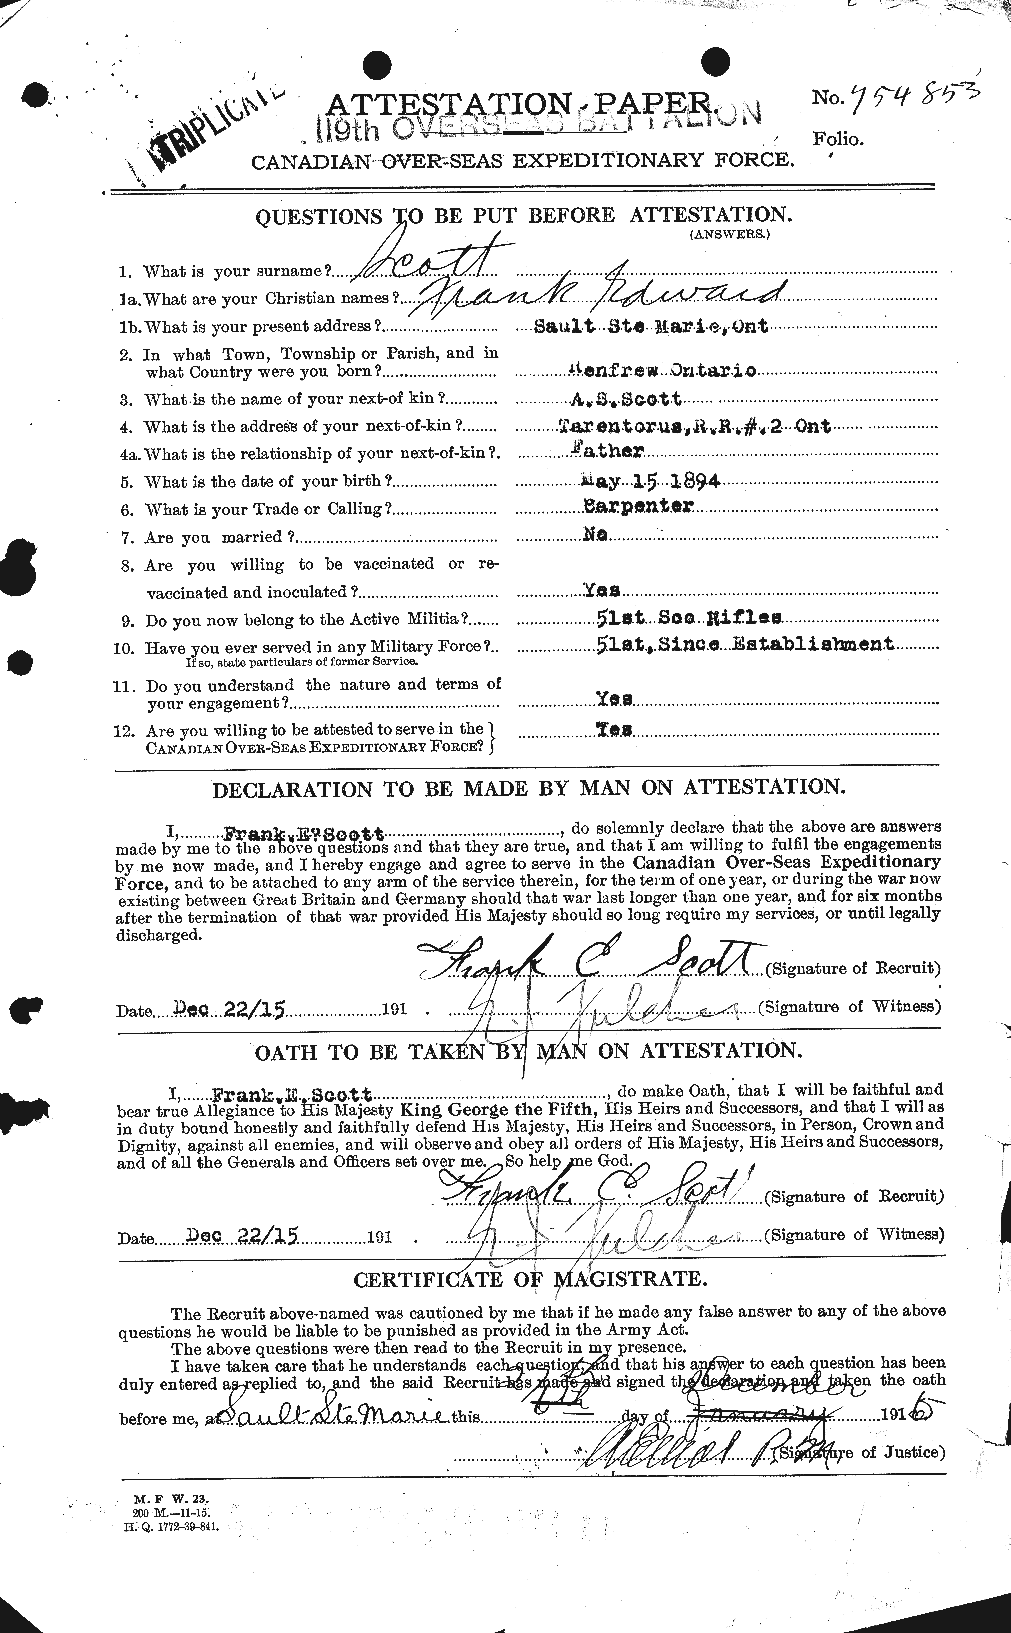 Personnel Records of the First World War - CEF 084703a